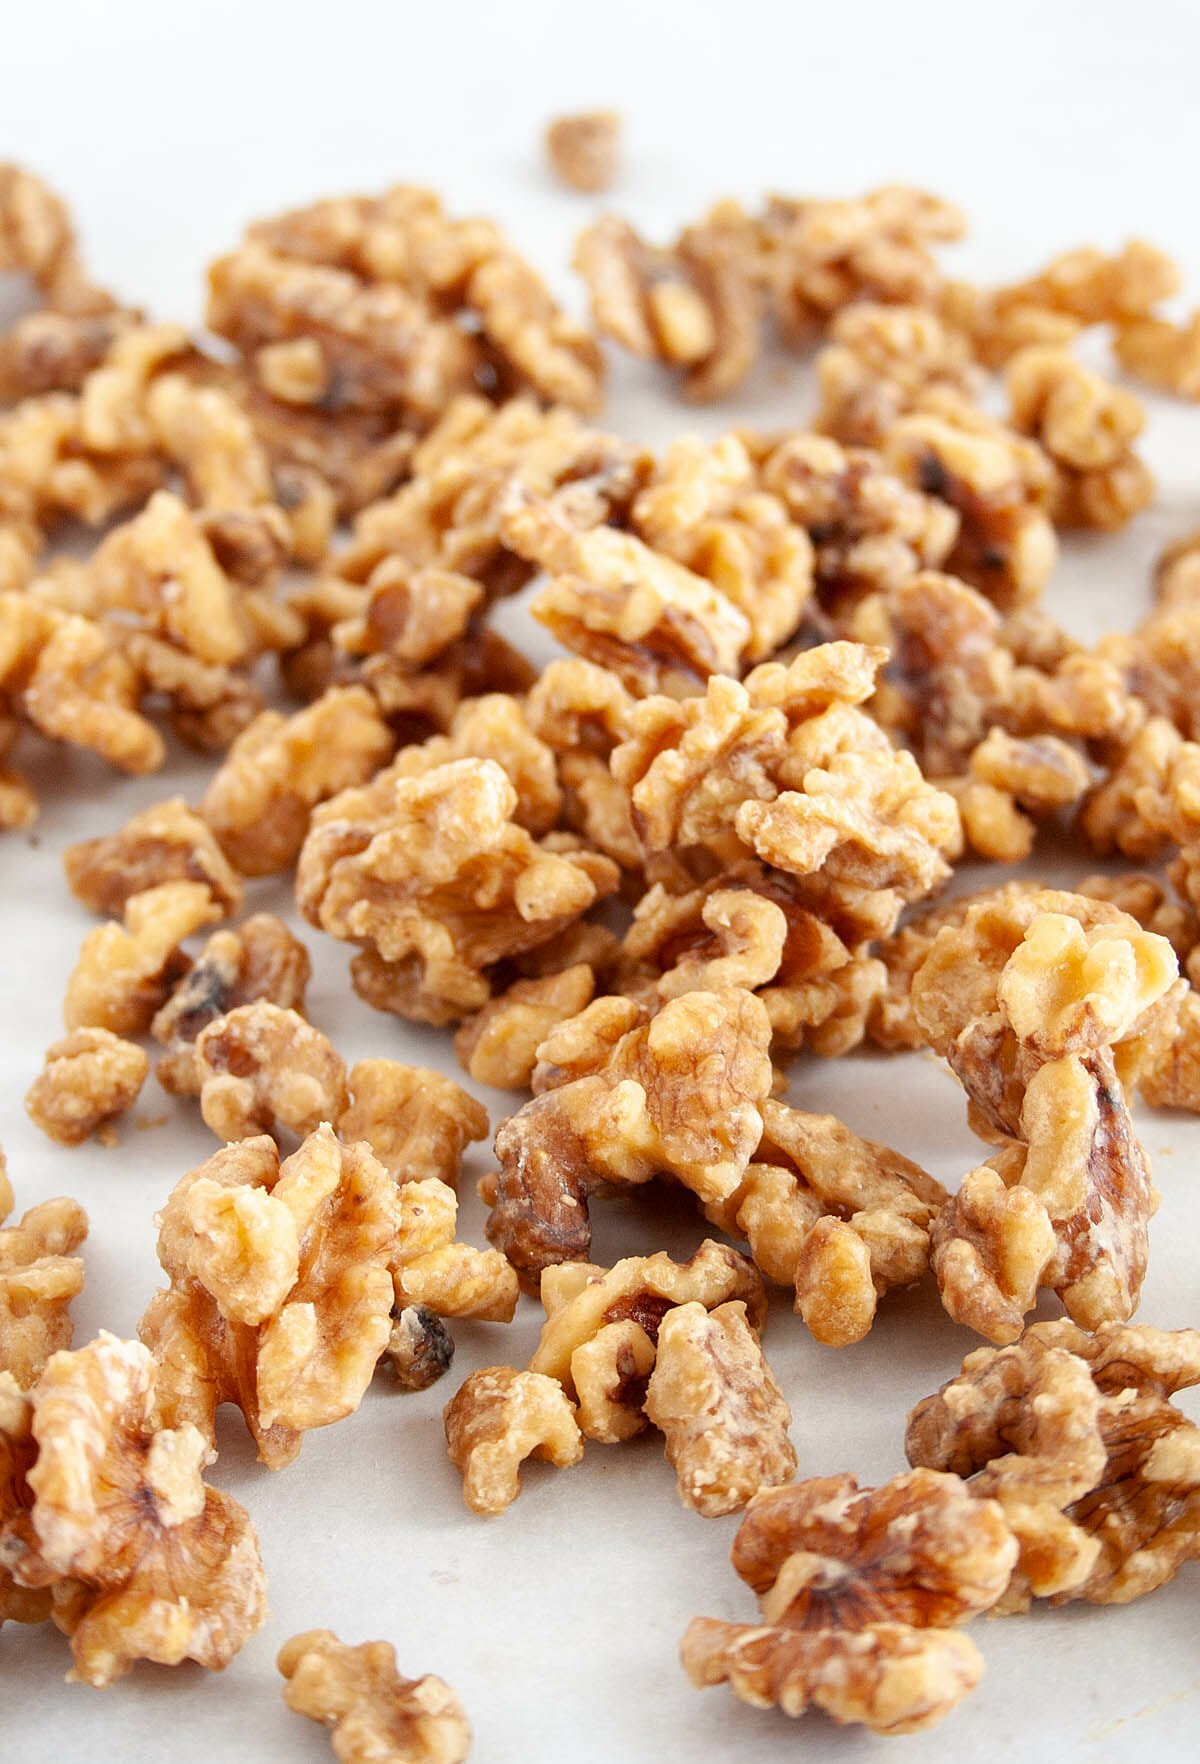 Maple Walnuts on parchment paper.